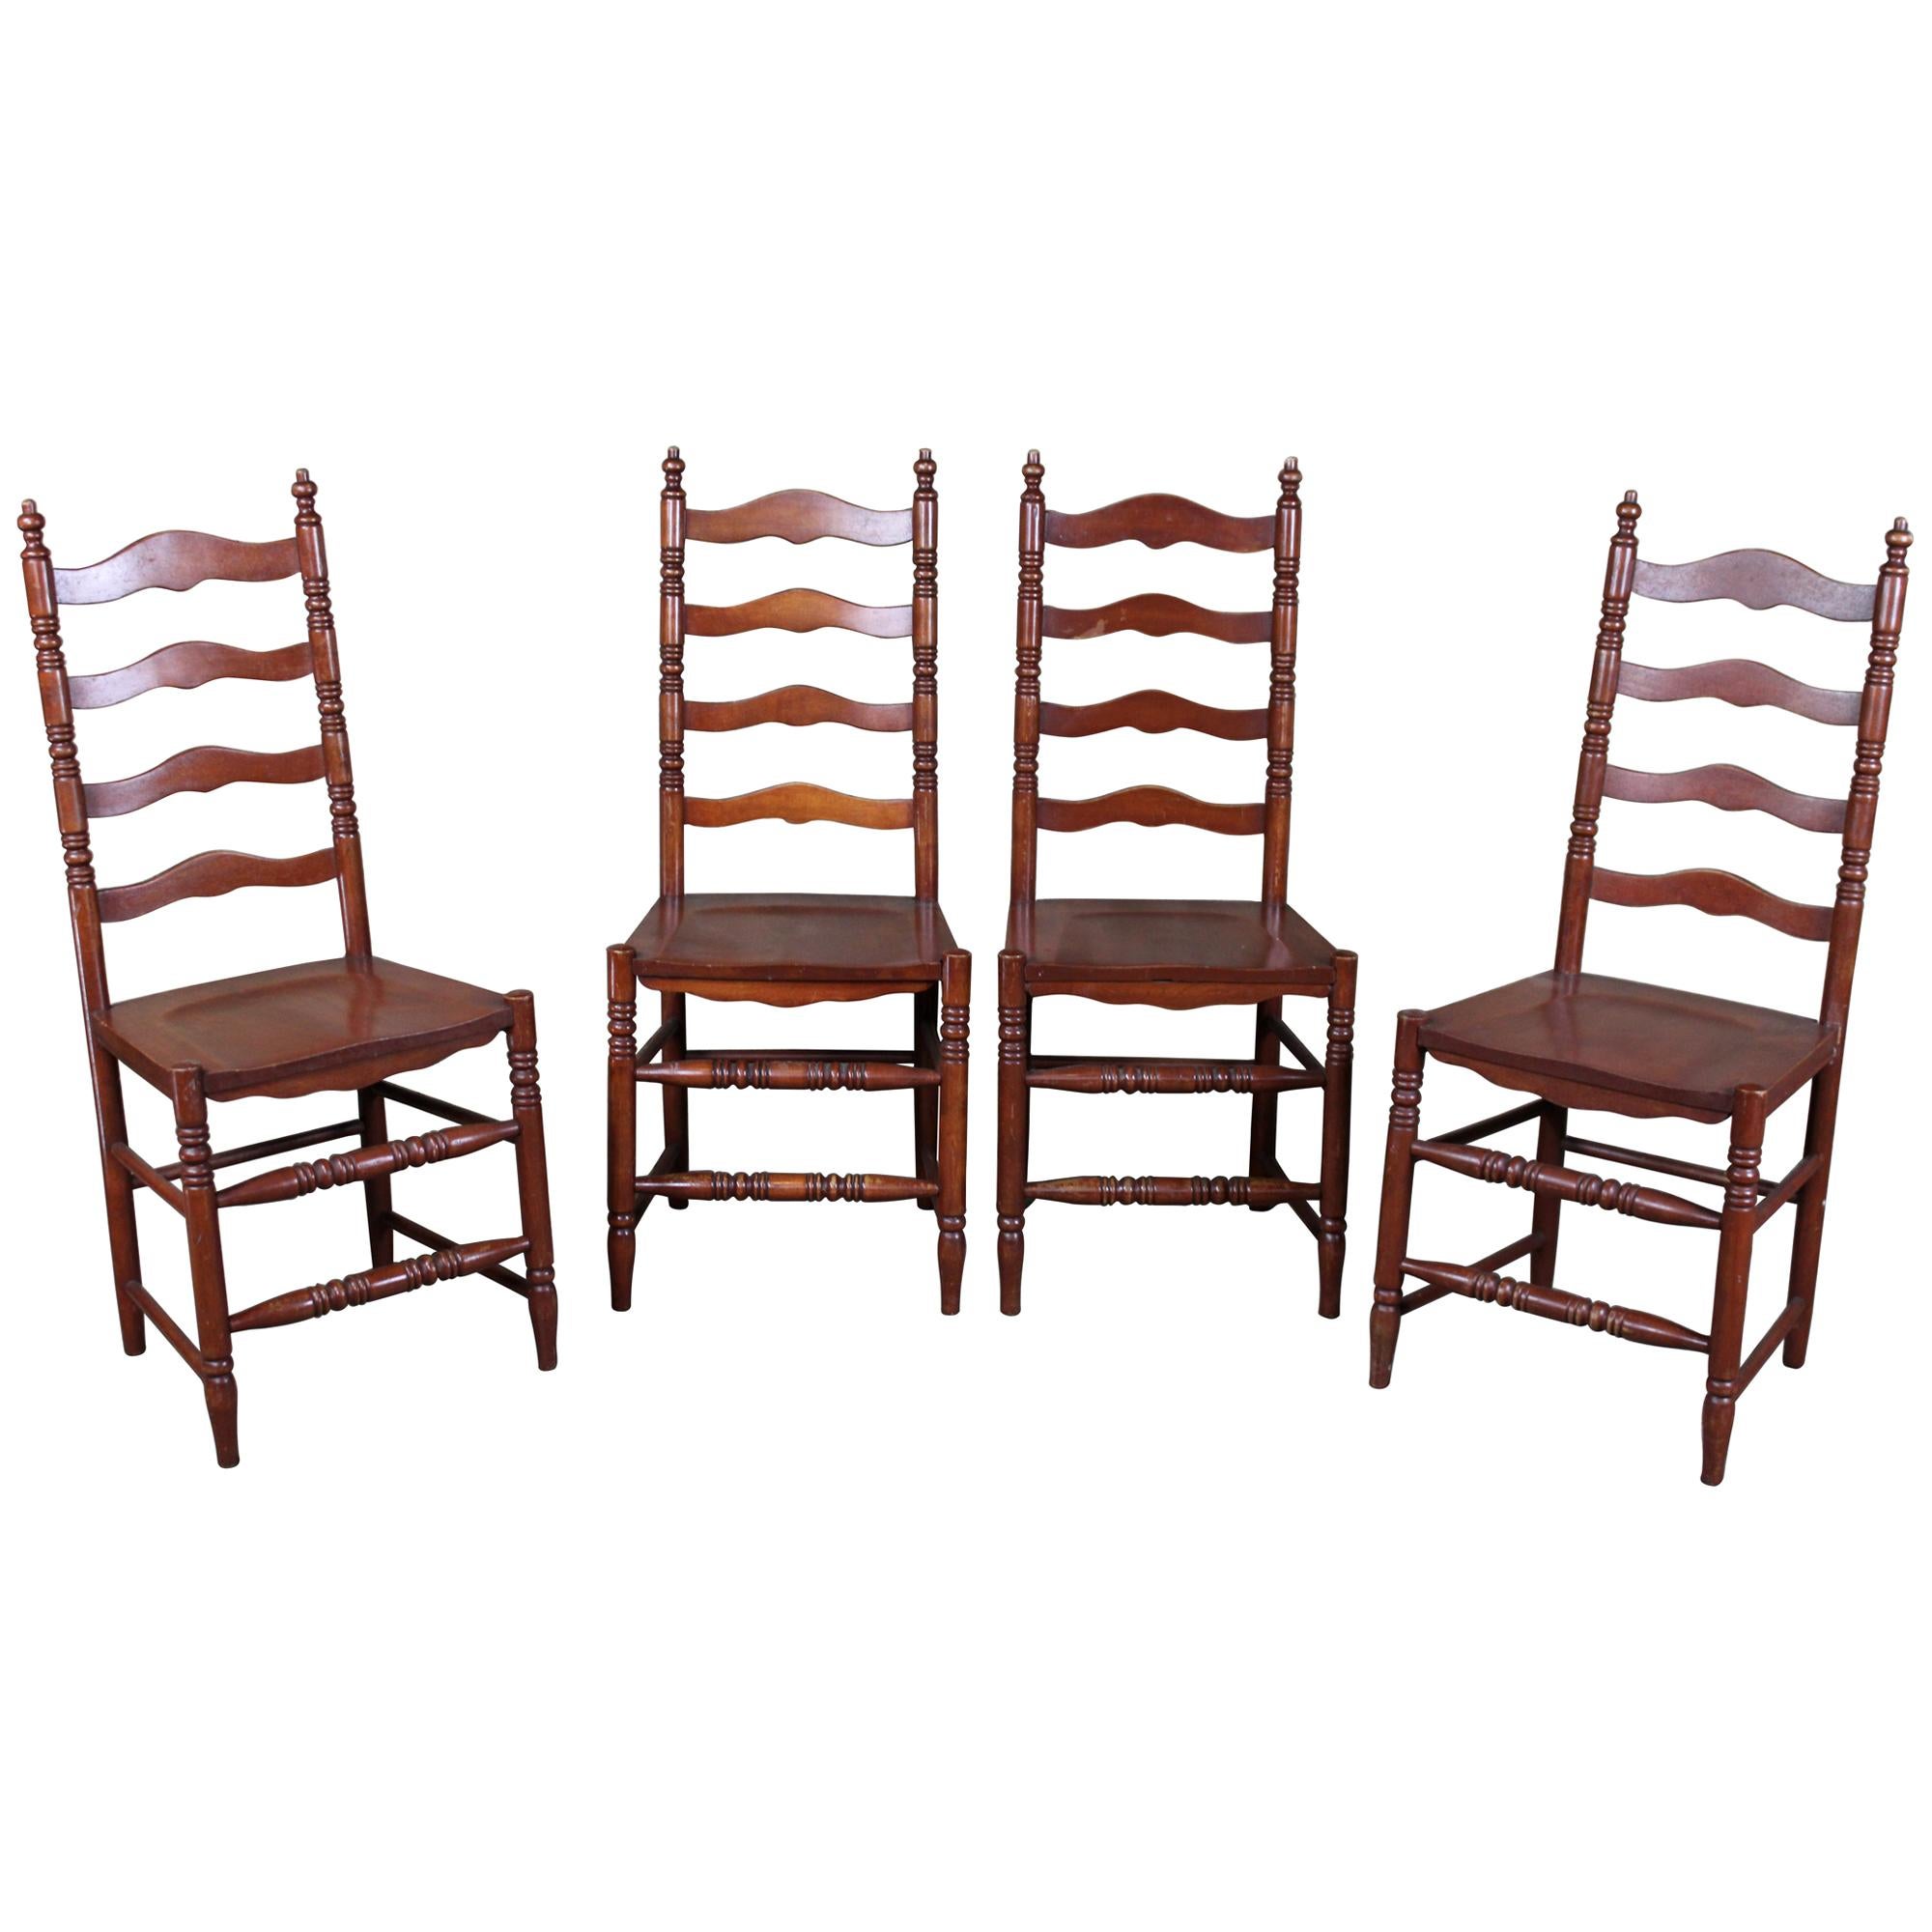 4 Vintage Shaker Style Maple Ladderback Dining Side Chairs Country Farmhouse